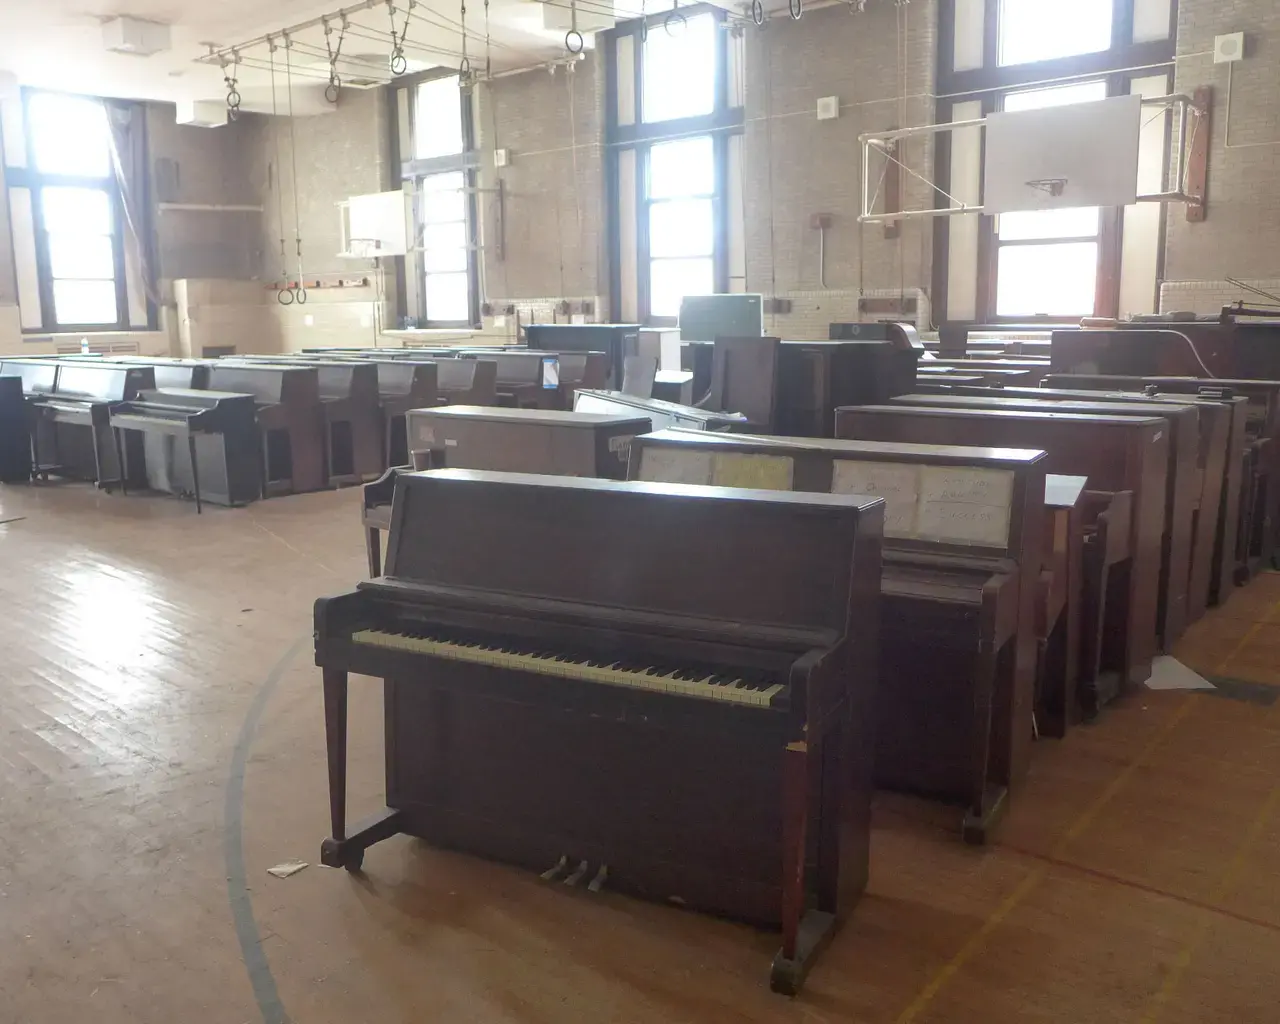 Abandoned pianos once owned by the Philadelphia School District. Photo by Robert Blackson.